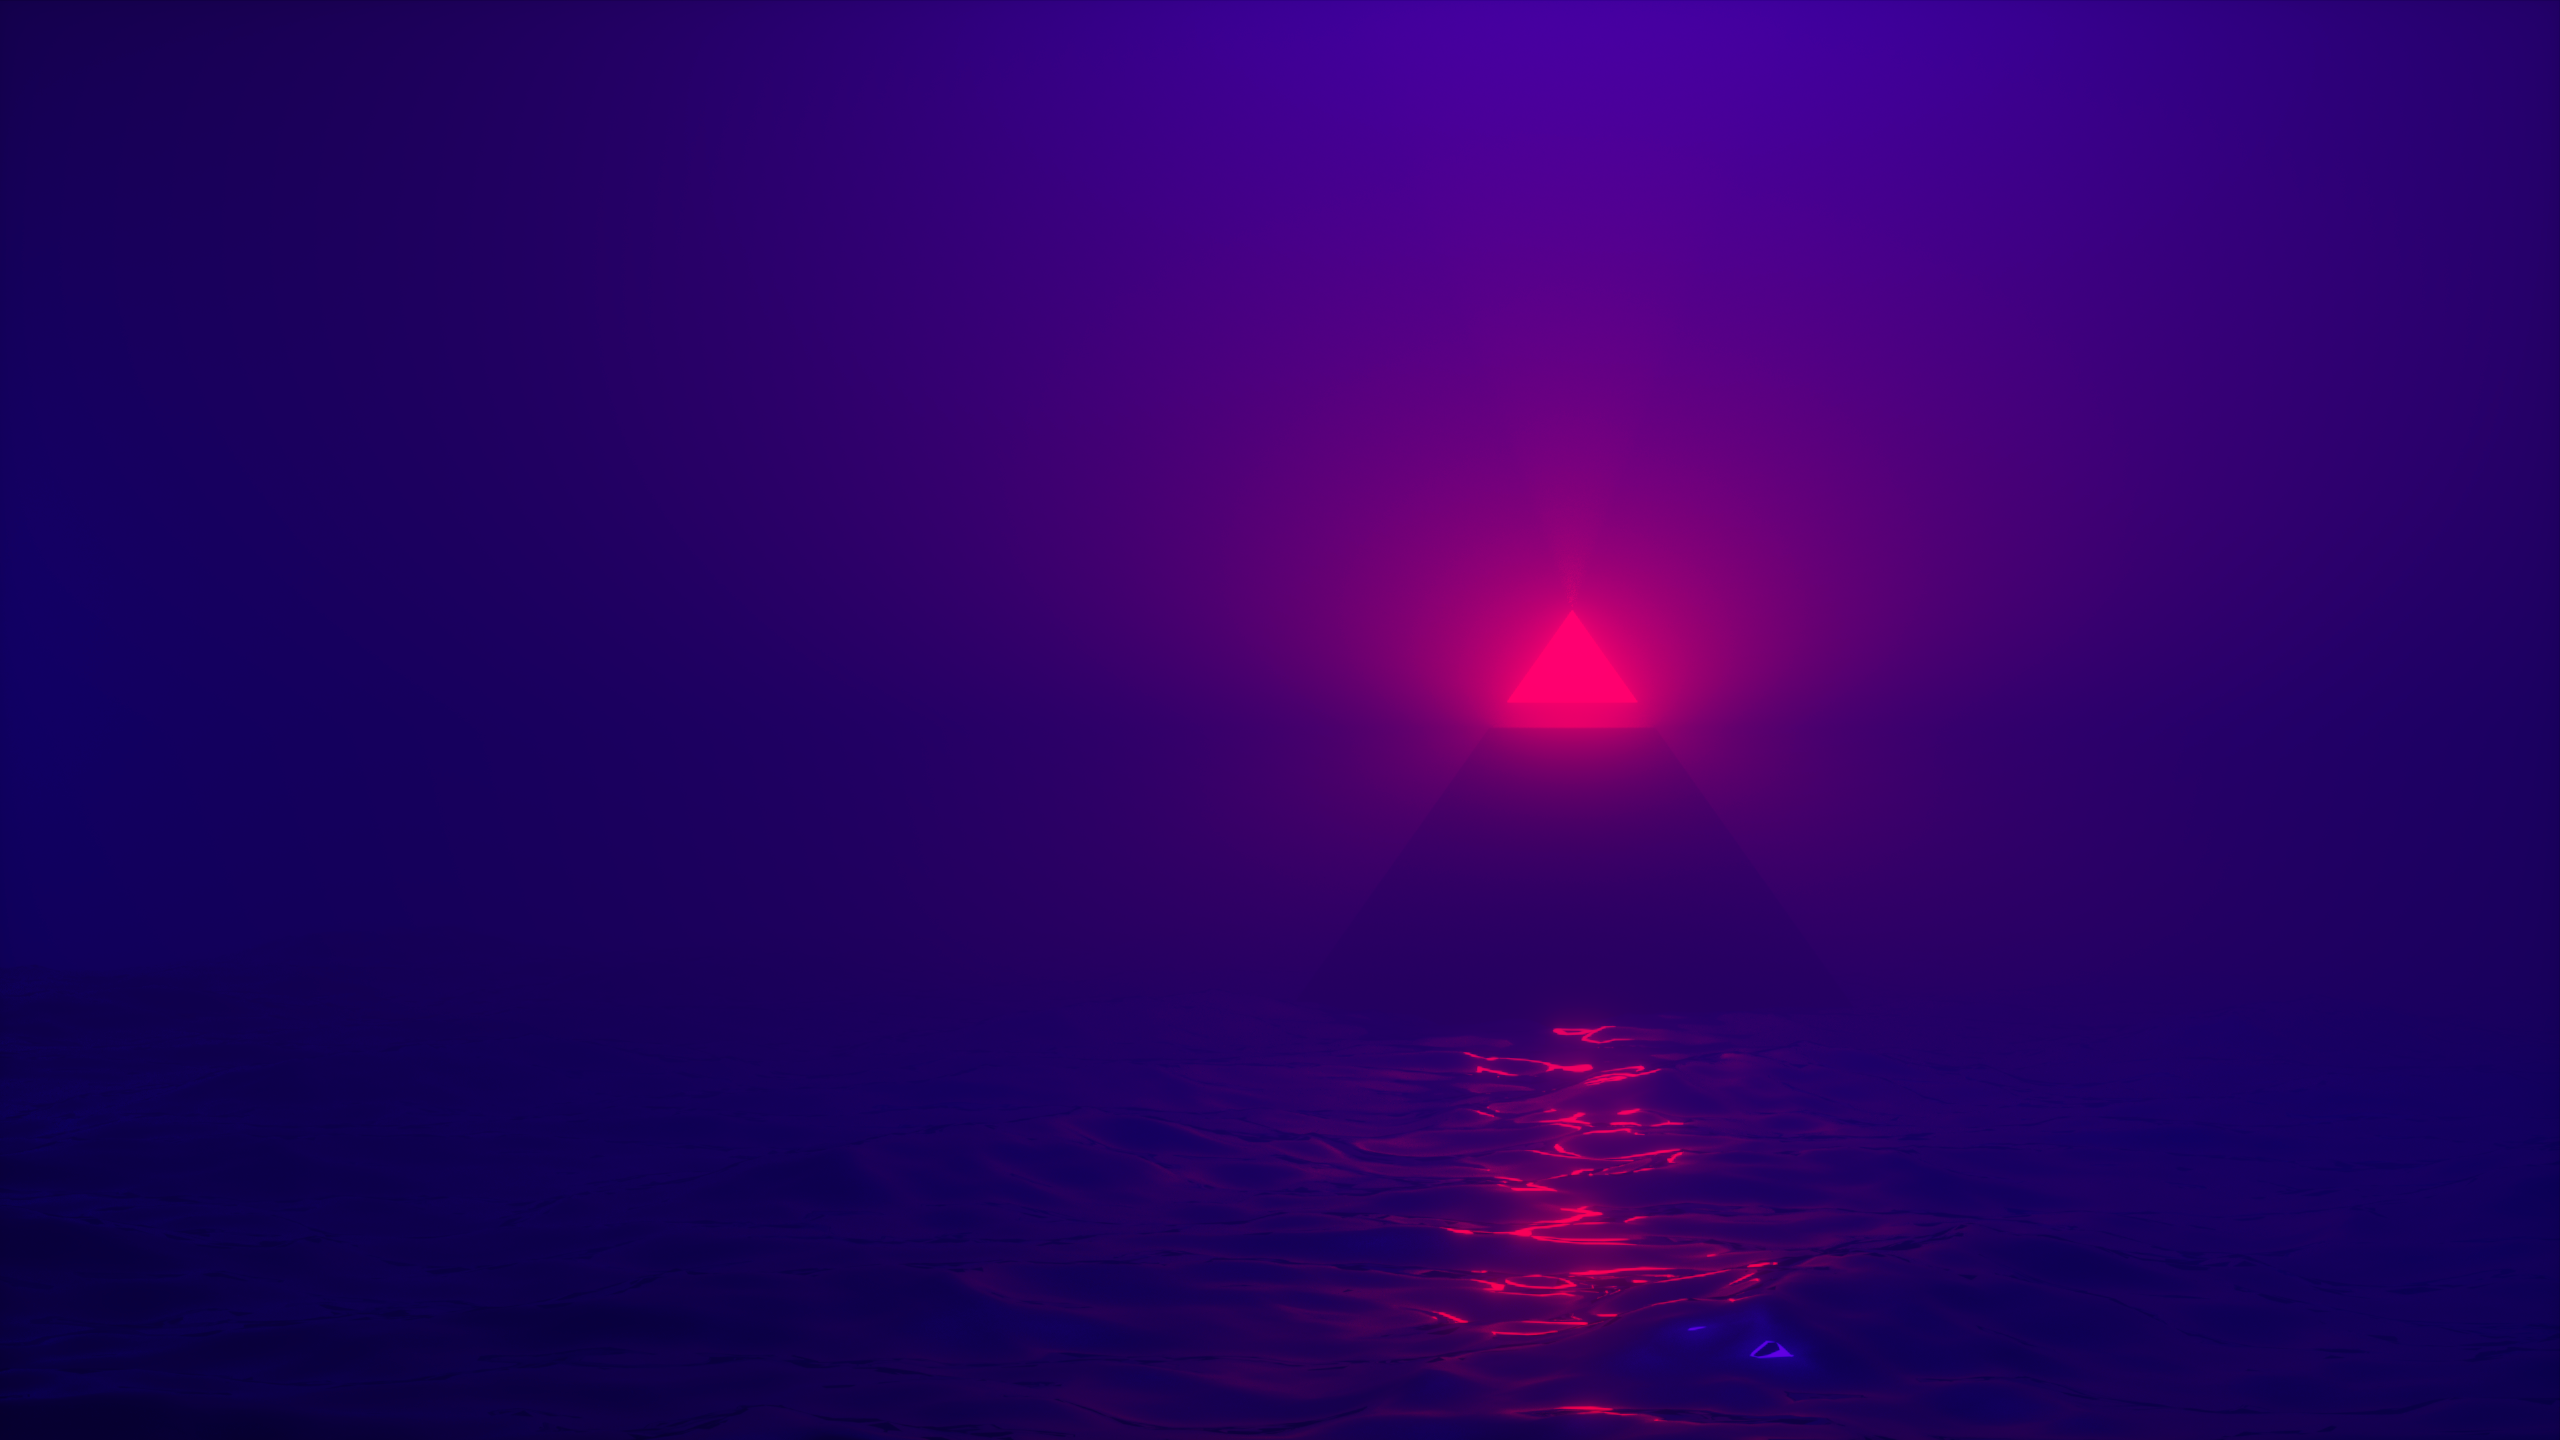 Pyramid Water Abstract Blender Blue Purple Red Neon Geometry Light Effects 2560x1440